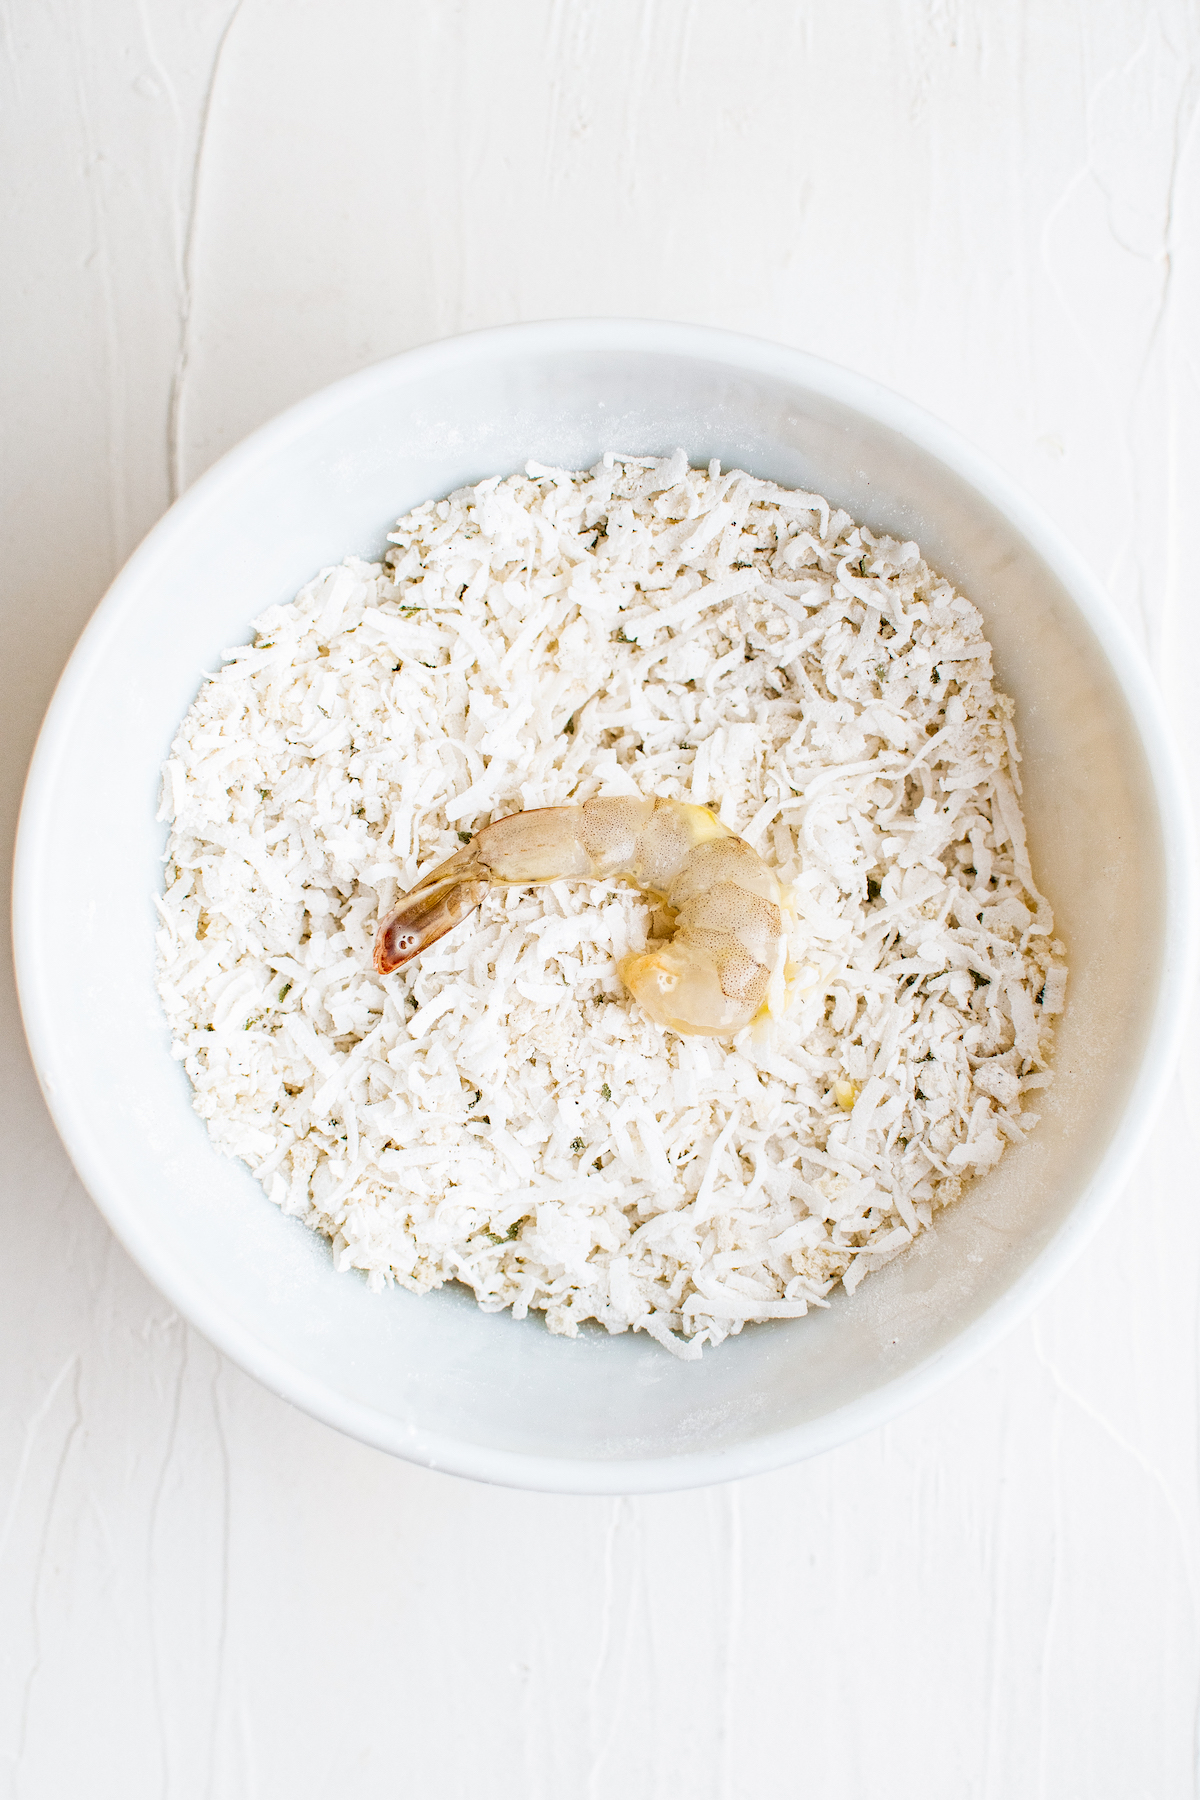 A shrimp coated in egg wash placed in a bowl of coconut and panko mixture.